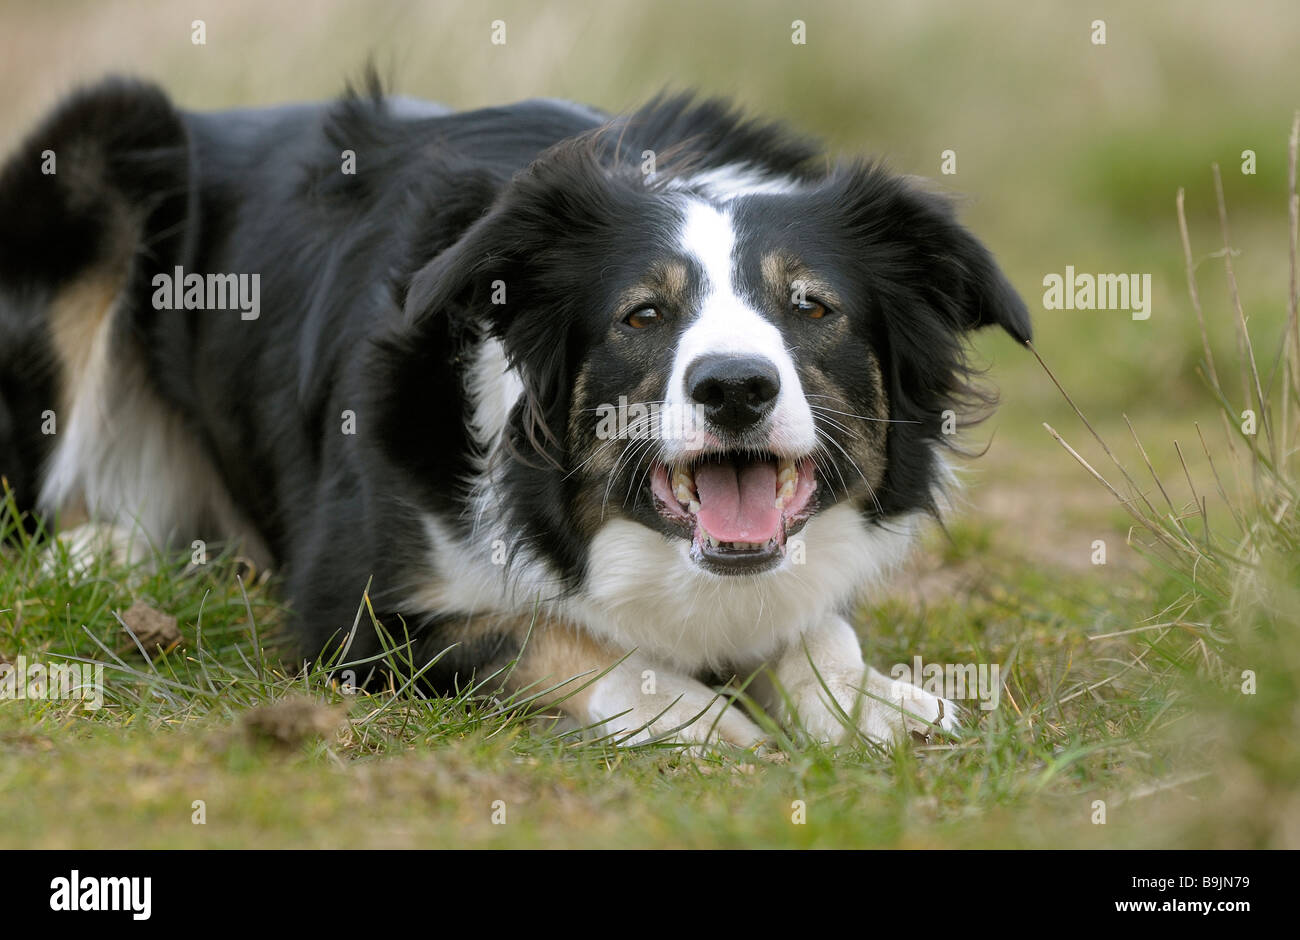 are welsh sheepdog aggressive